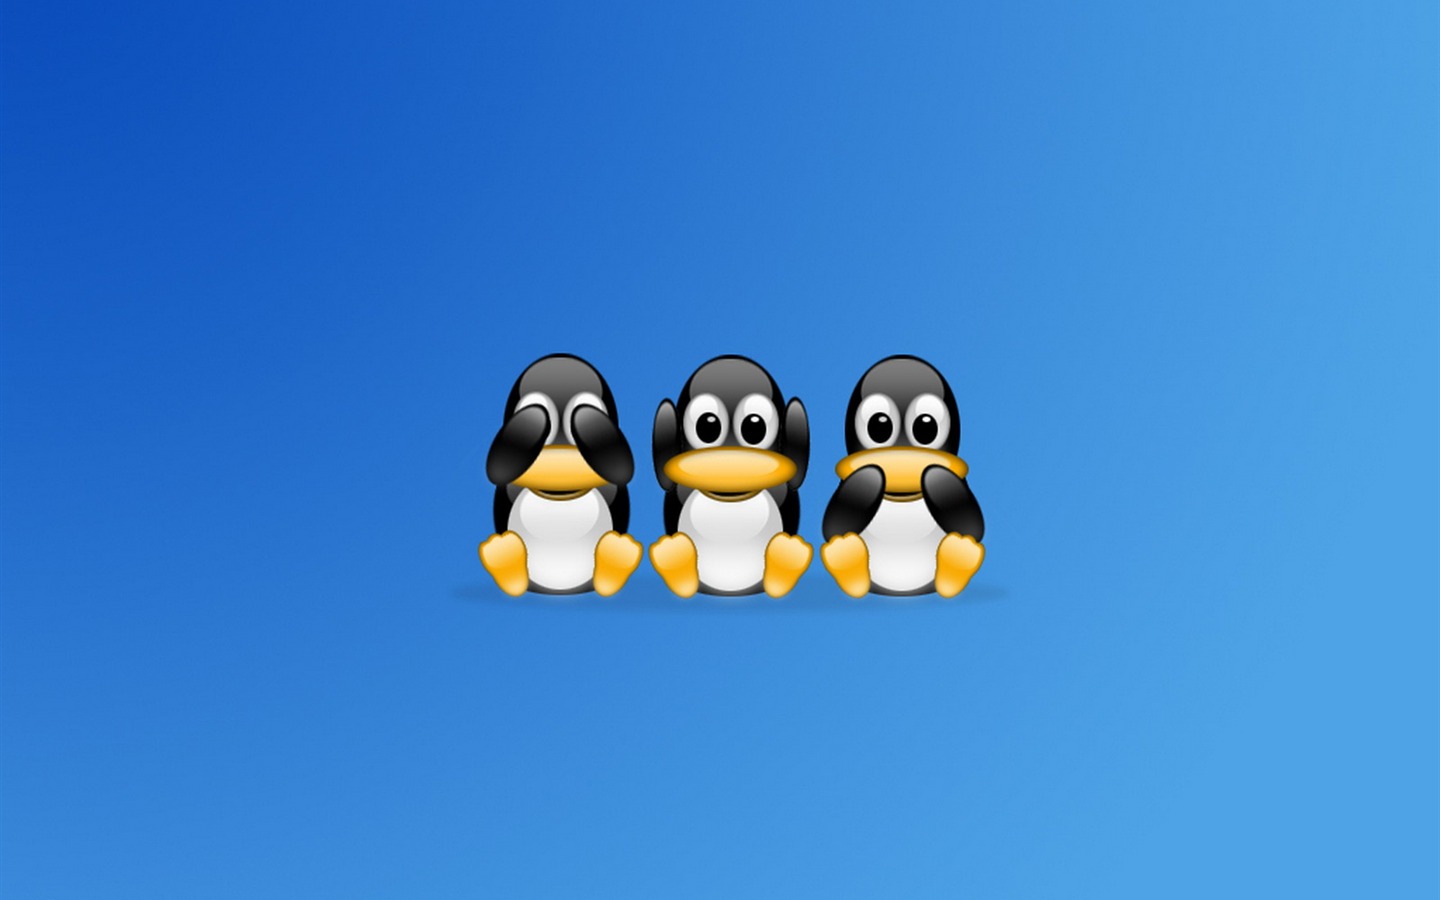 Linux tapety (3) #12 - 1440x900